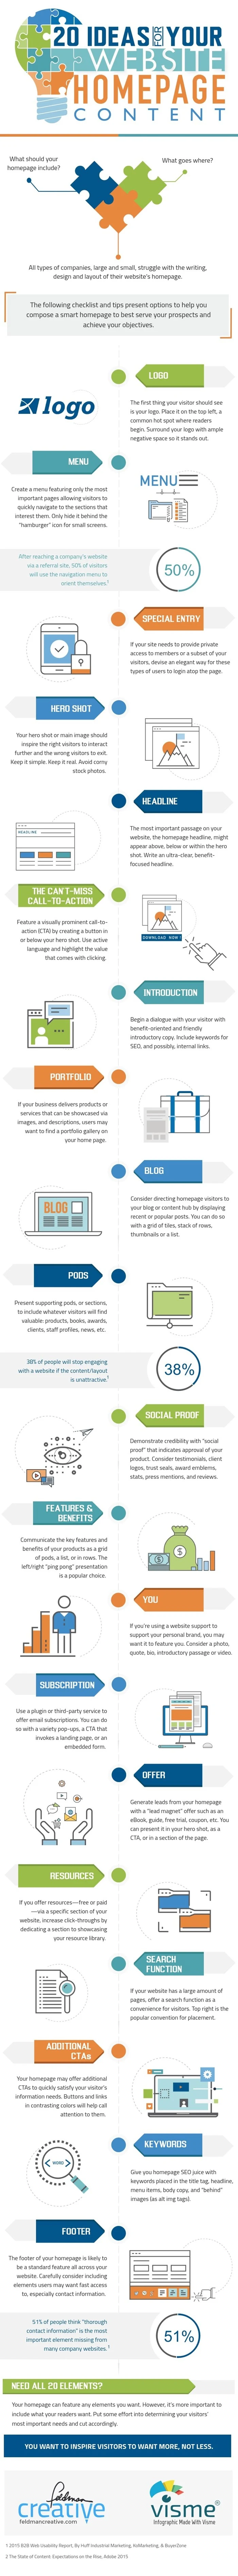 20 Ideas for Your Website Homepage Content - #Infographic